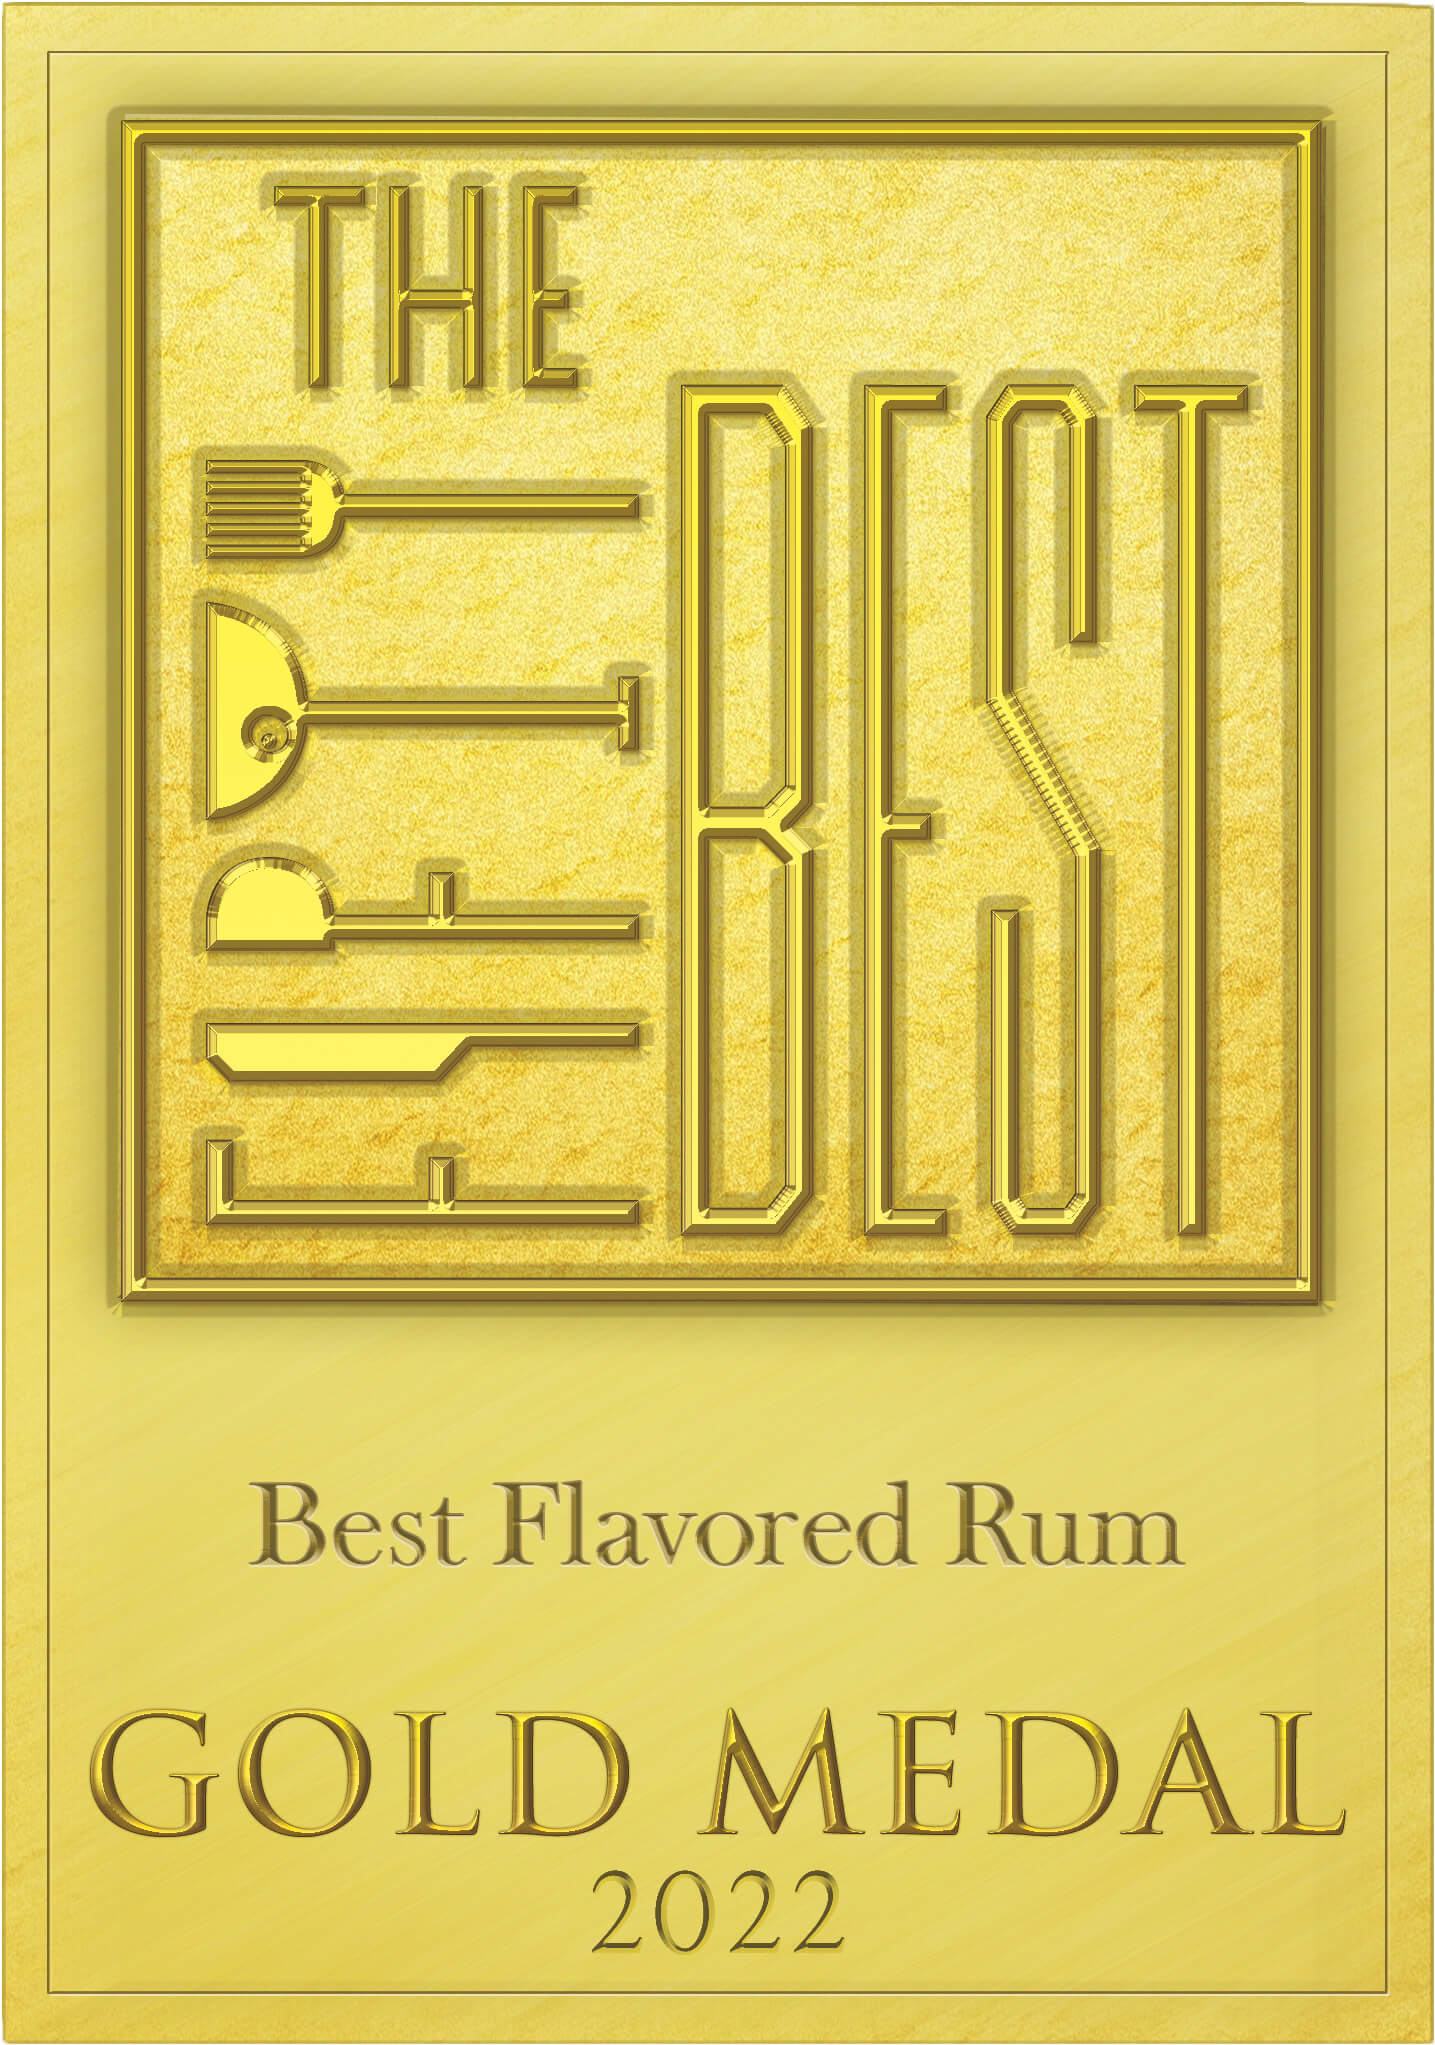 TheFiftyBest_Flavored_Rum_Gold_Medal_2022.jpg